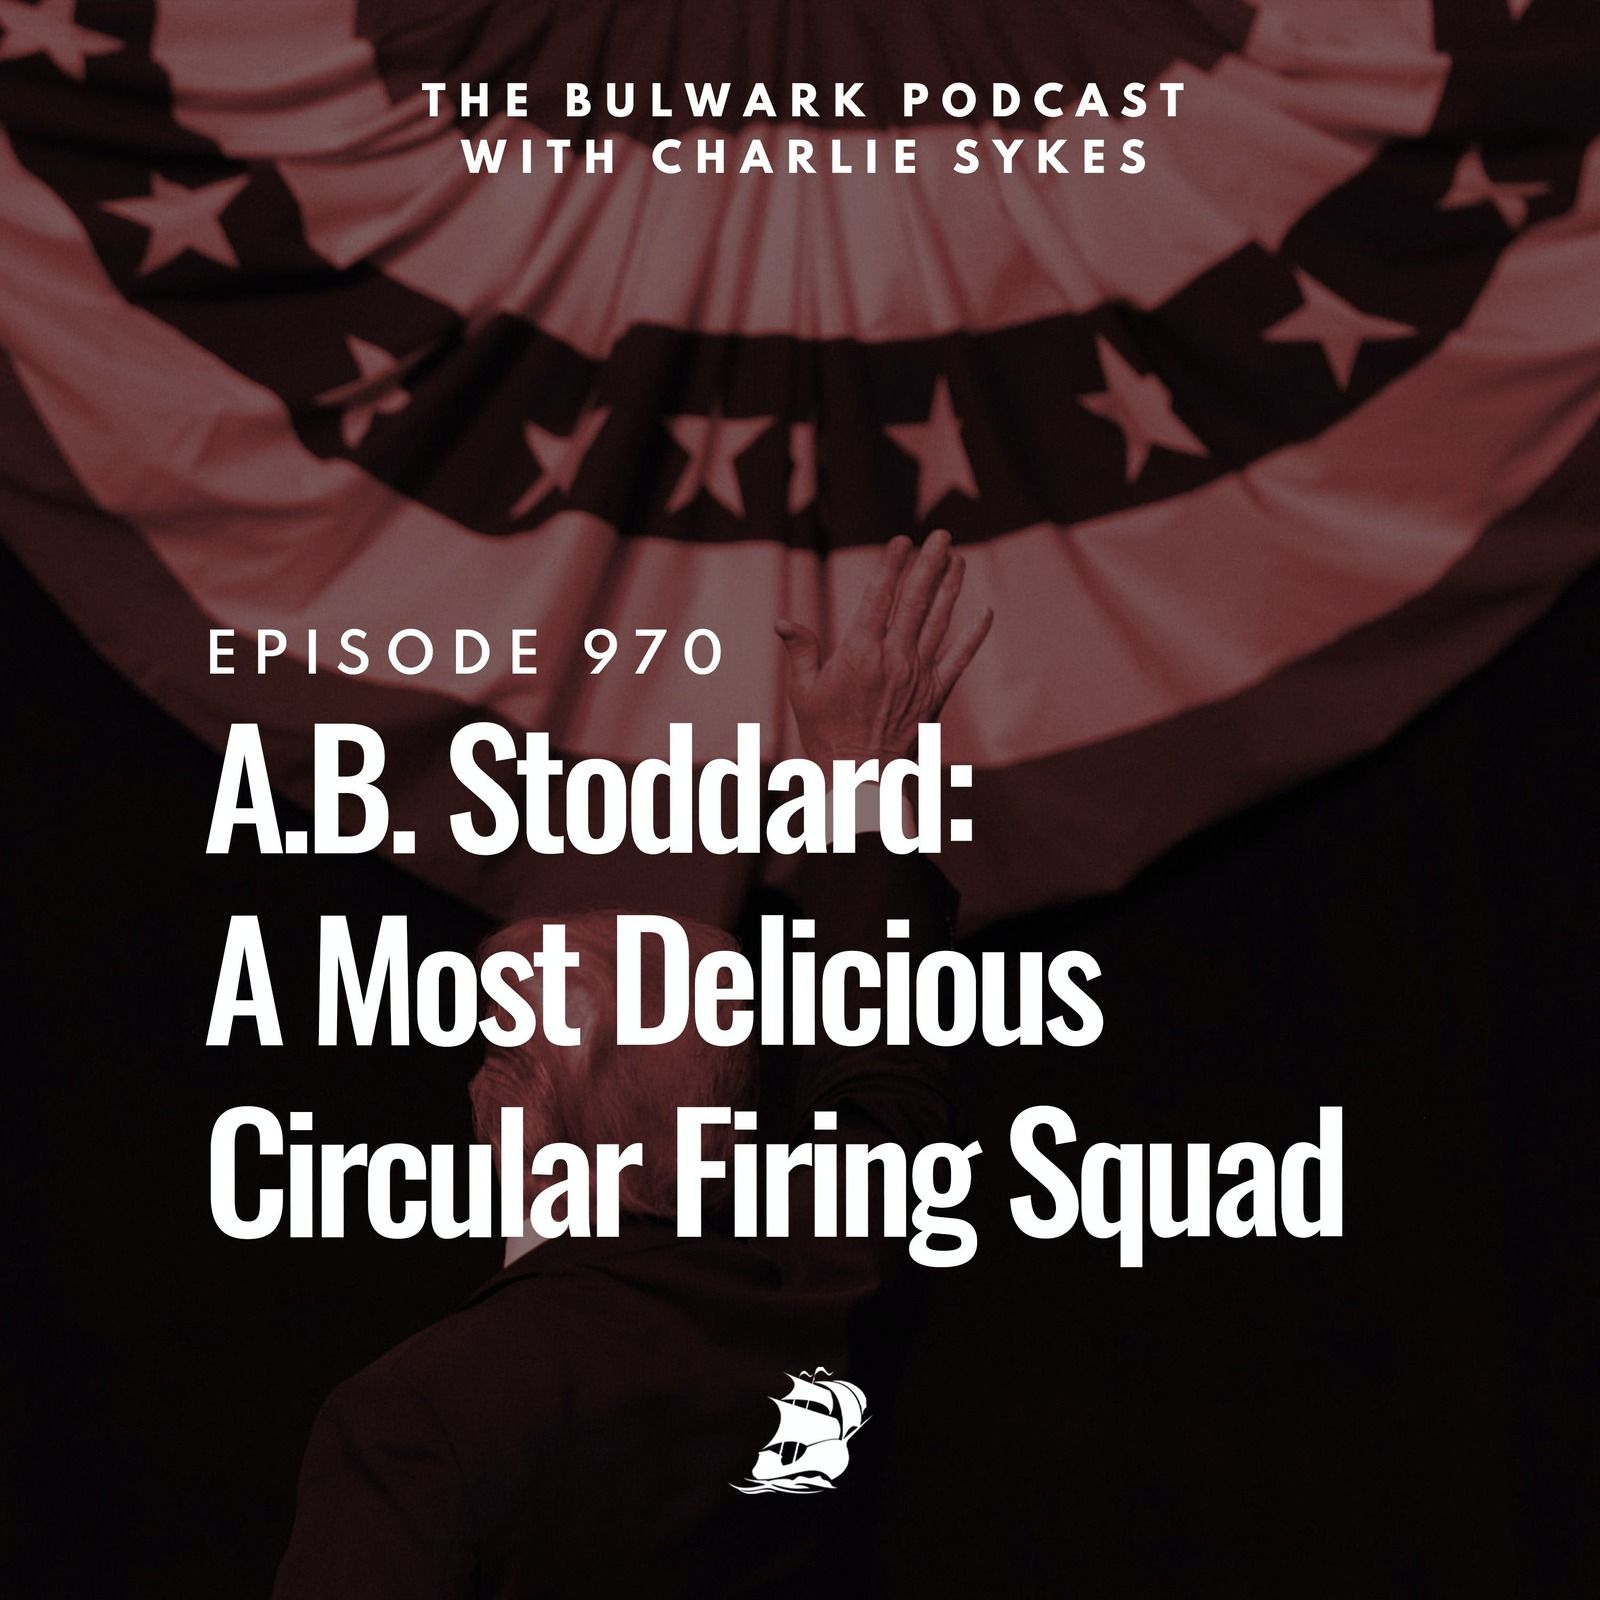 A.B. Stoddard: A Most Delicious Circular Firing Squad by The Bulwark Podcast